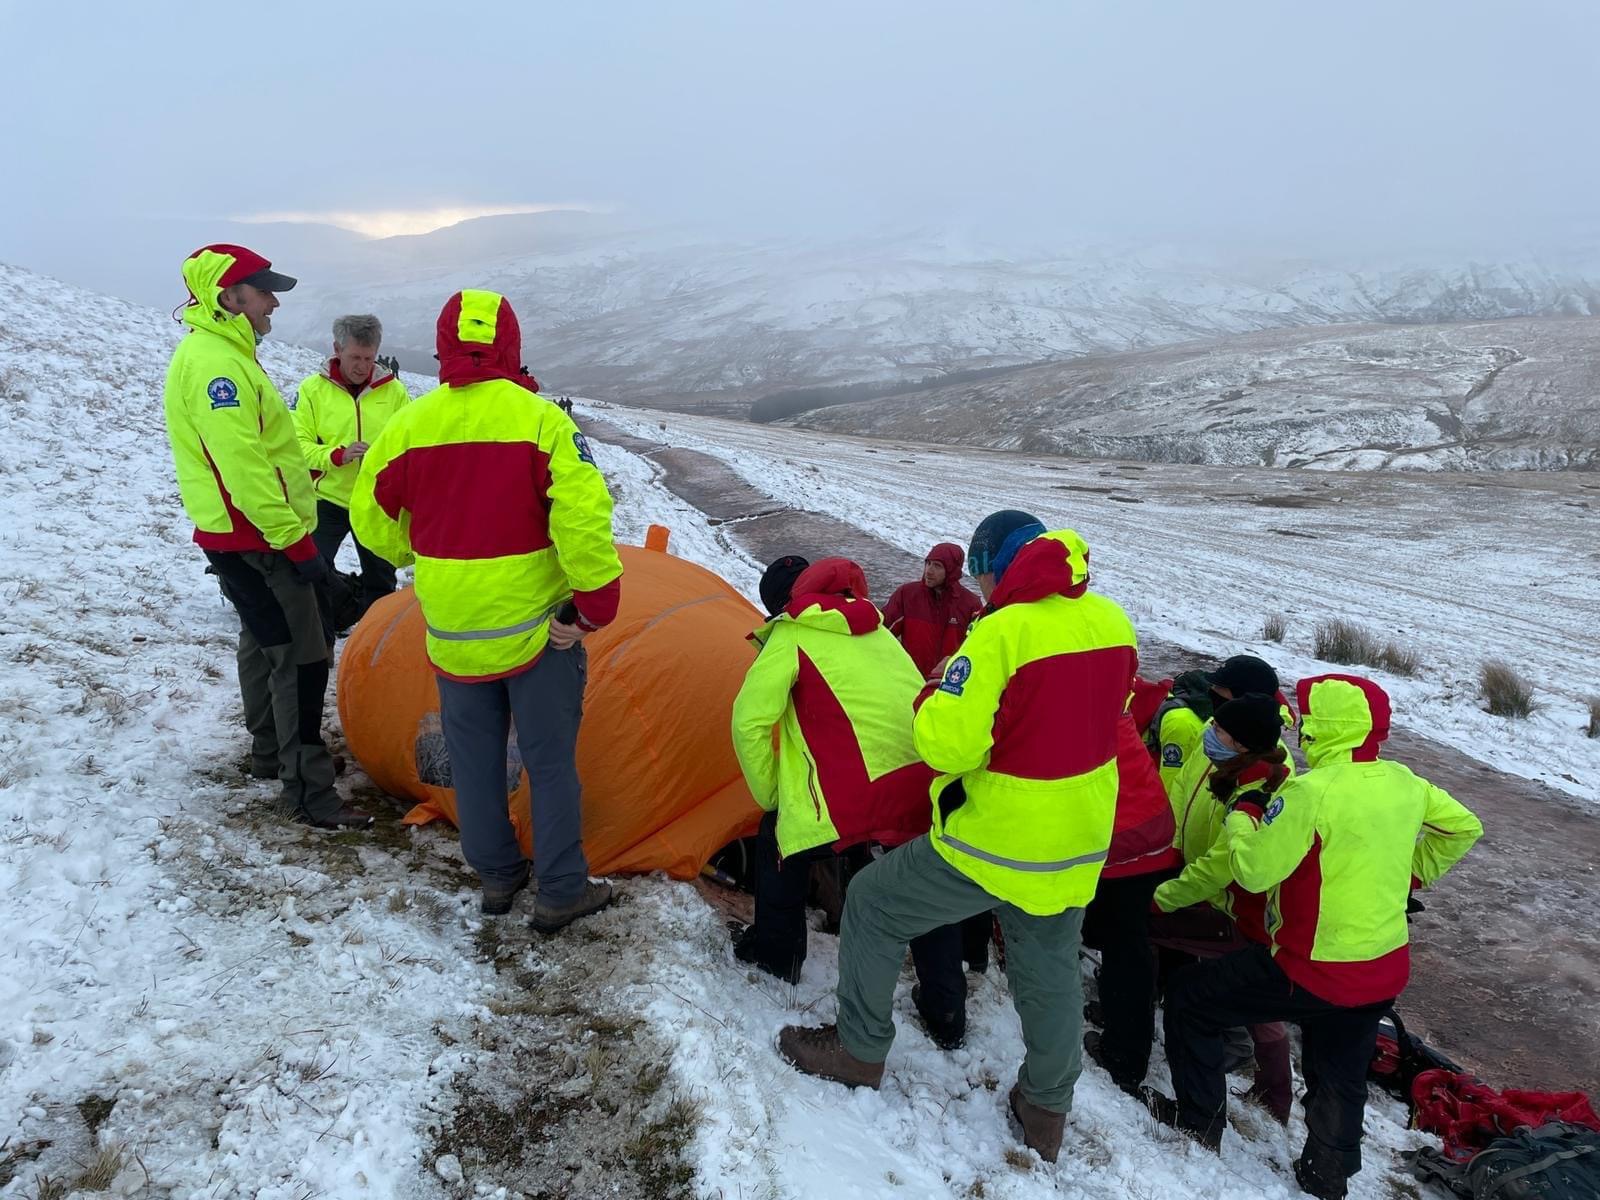 NEWS | Lady suffers nasty injury on Pen y Fan as snowfall leads to difficult conditions